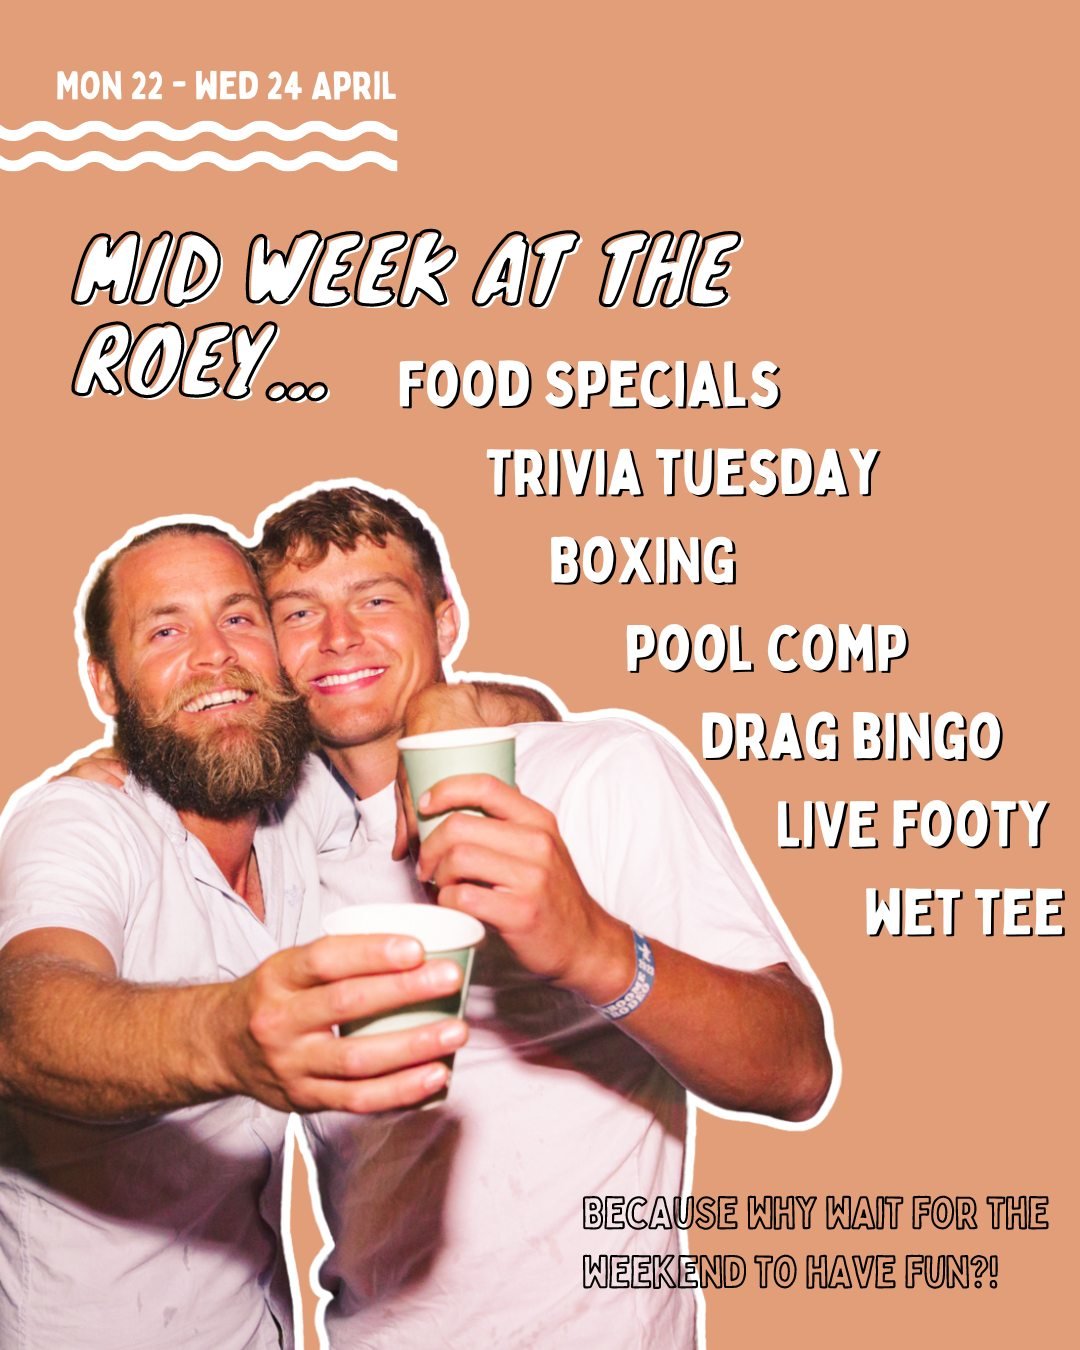 It's a 4 day working week... WOOHOO!

Here's what's happening at the Roey Mon-Wed this week 👇🏽

MON 👉🏽 Parmi Night in both Sports Bar &amp; Pearlers! Huge Chicken Parmi, Chips &amp; Salad for just $28

TUES 👉🏽 Trivia Tuesday 🧠 with Toni in Pea